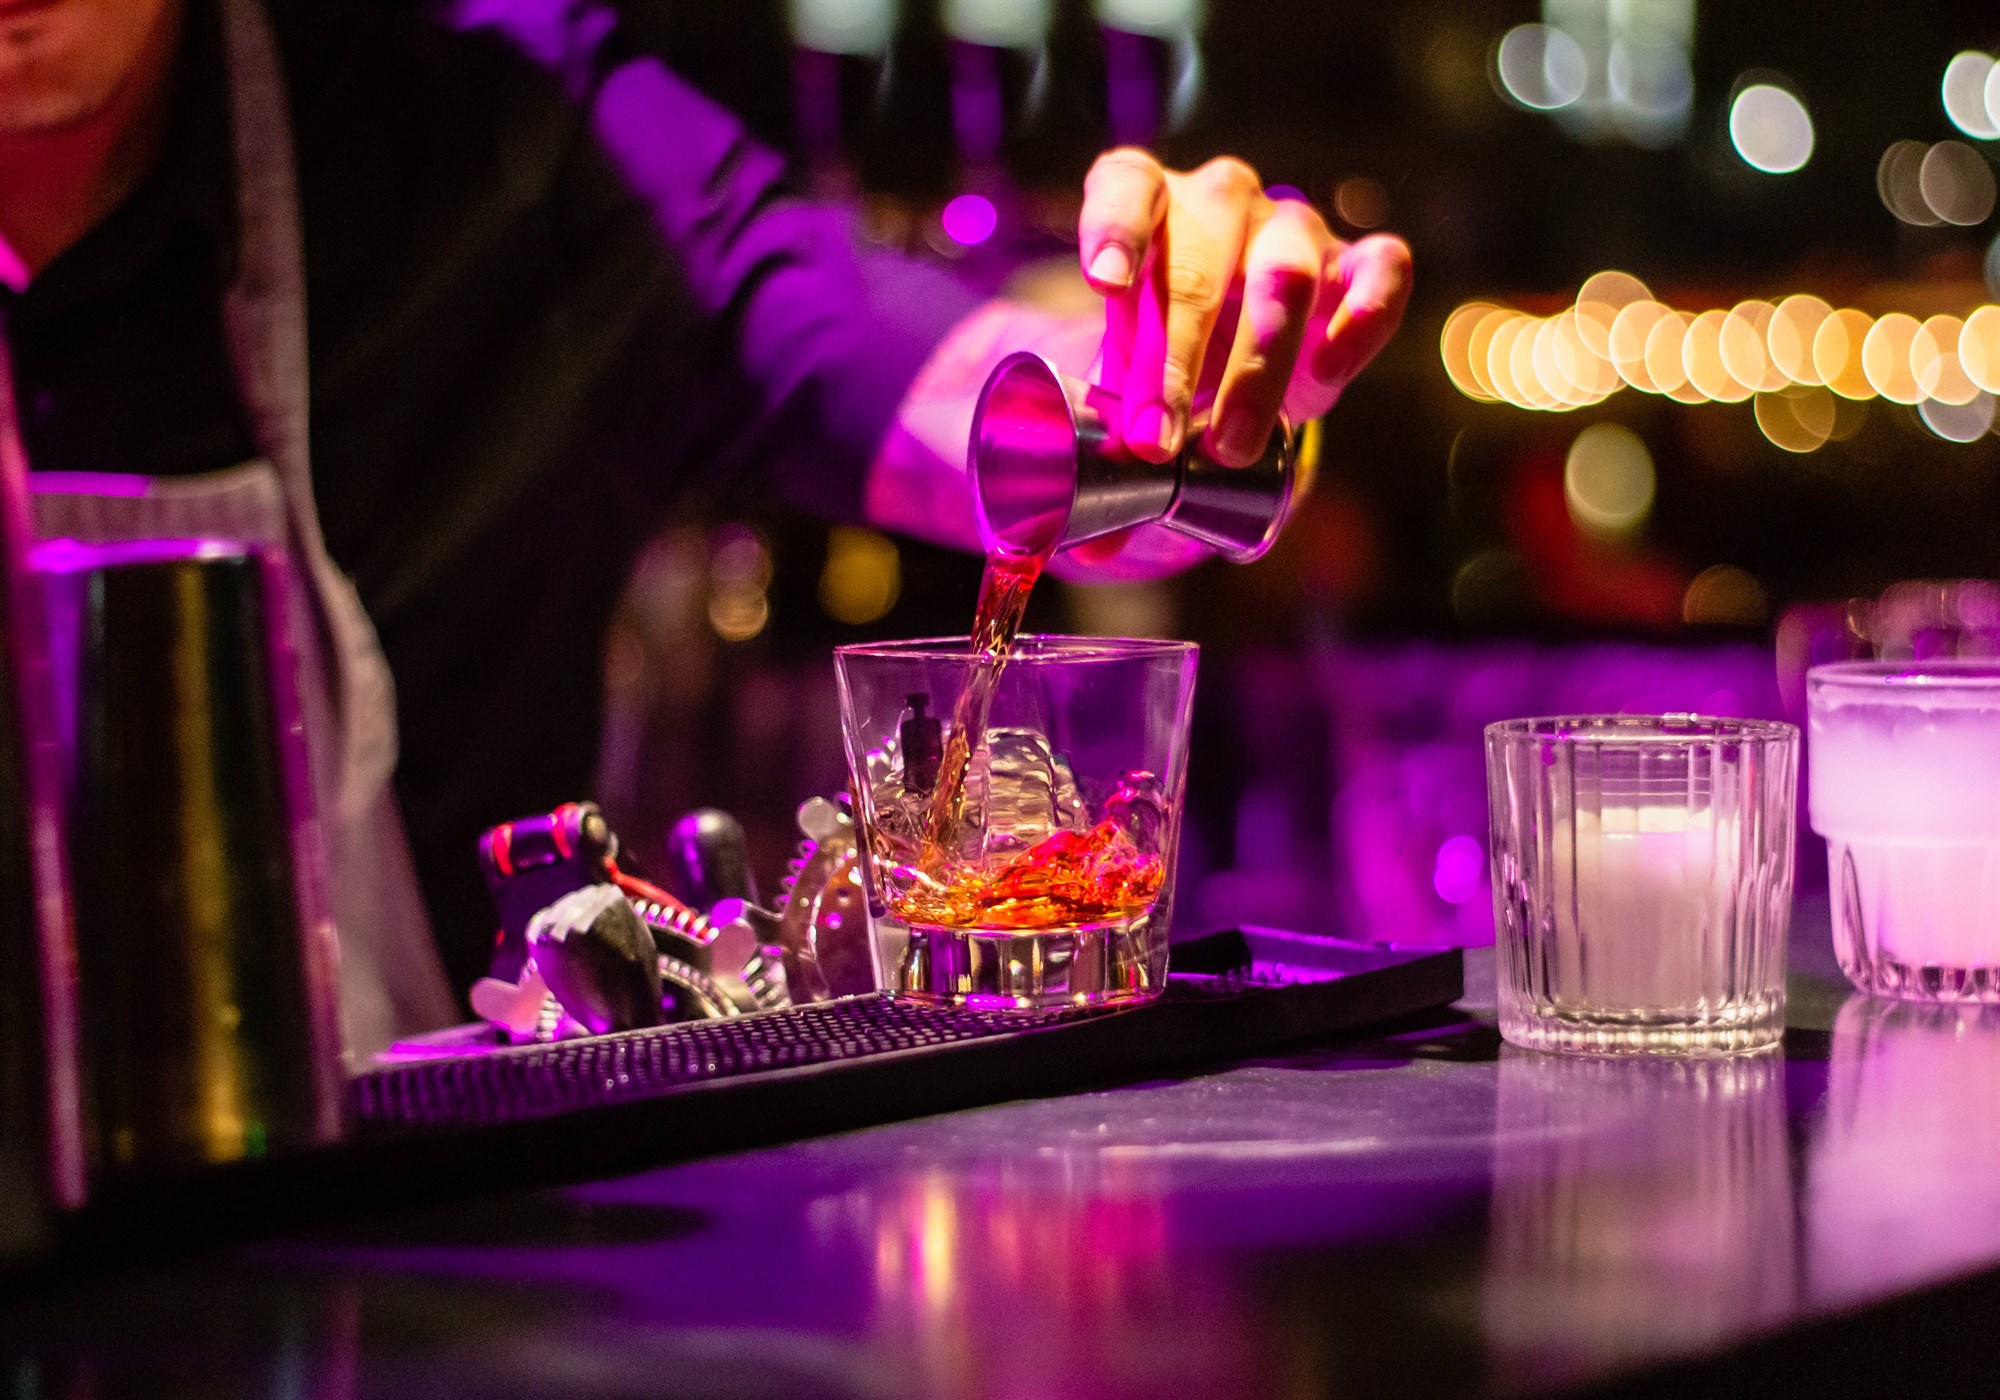 Bartender pouring a shot of spirit into a glass with ice on a bar top in purple light.